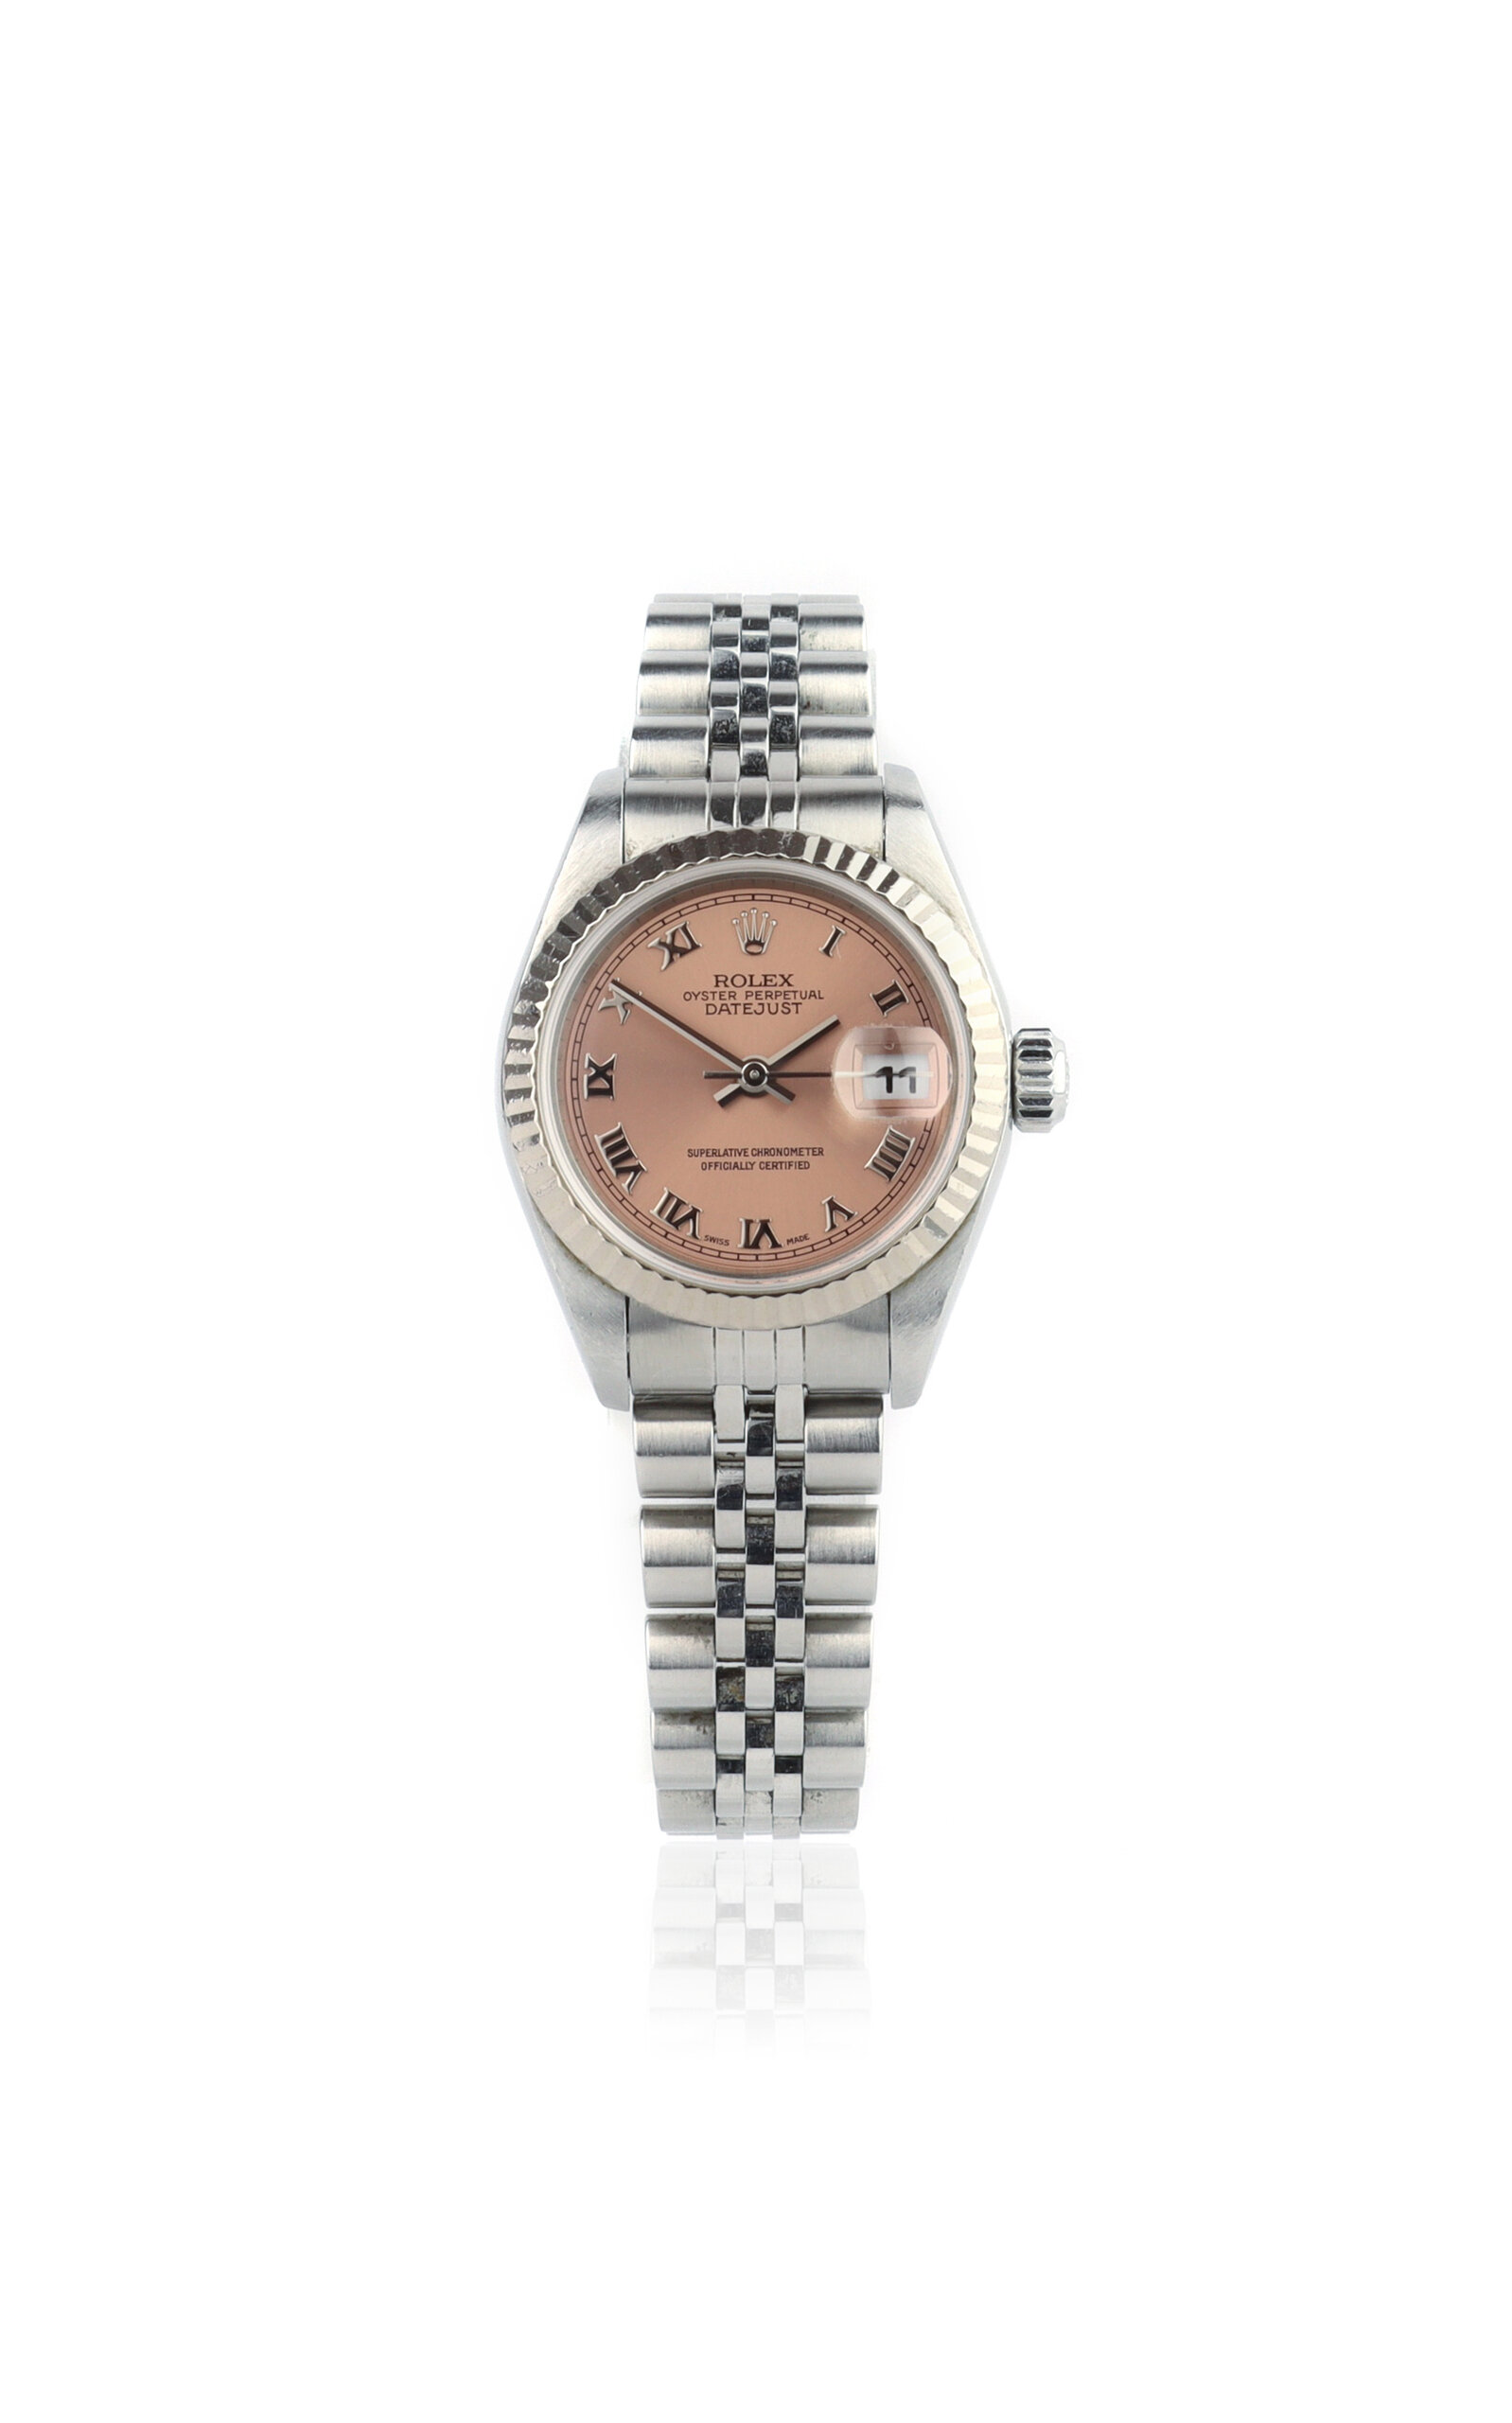 Private Label London Vintage Rolex Datejust Stainless Steel Watch In Pink